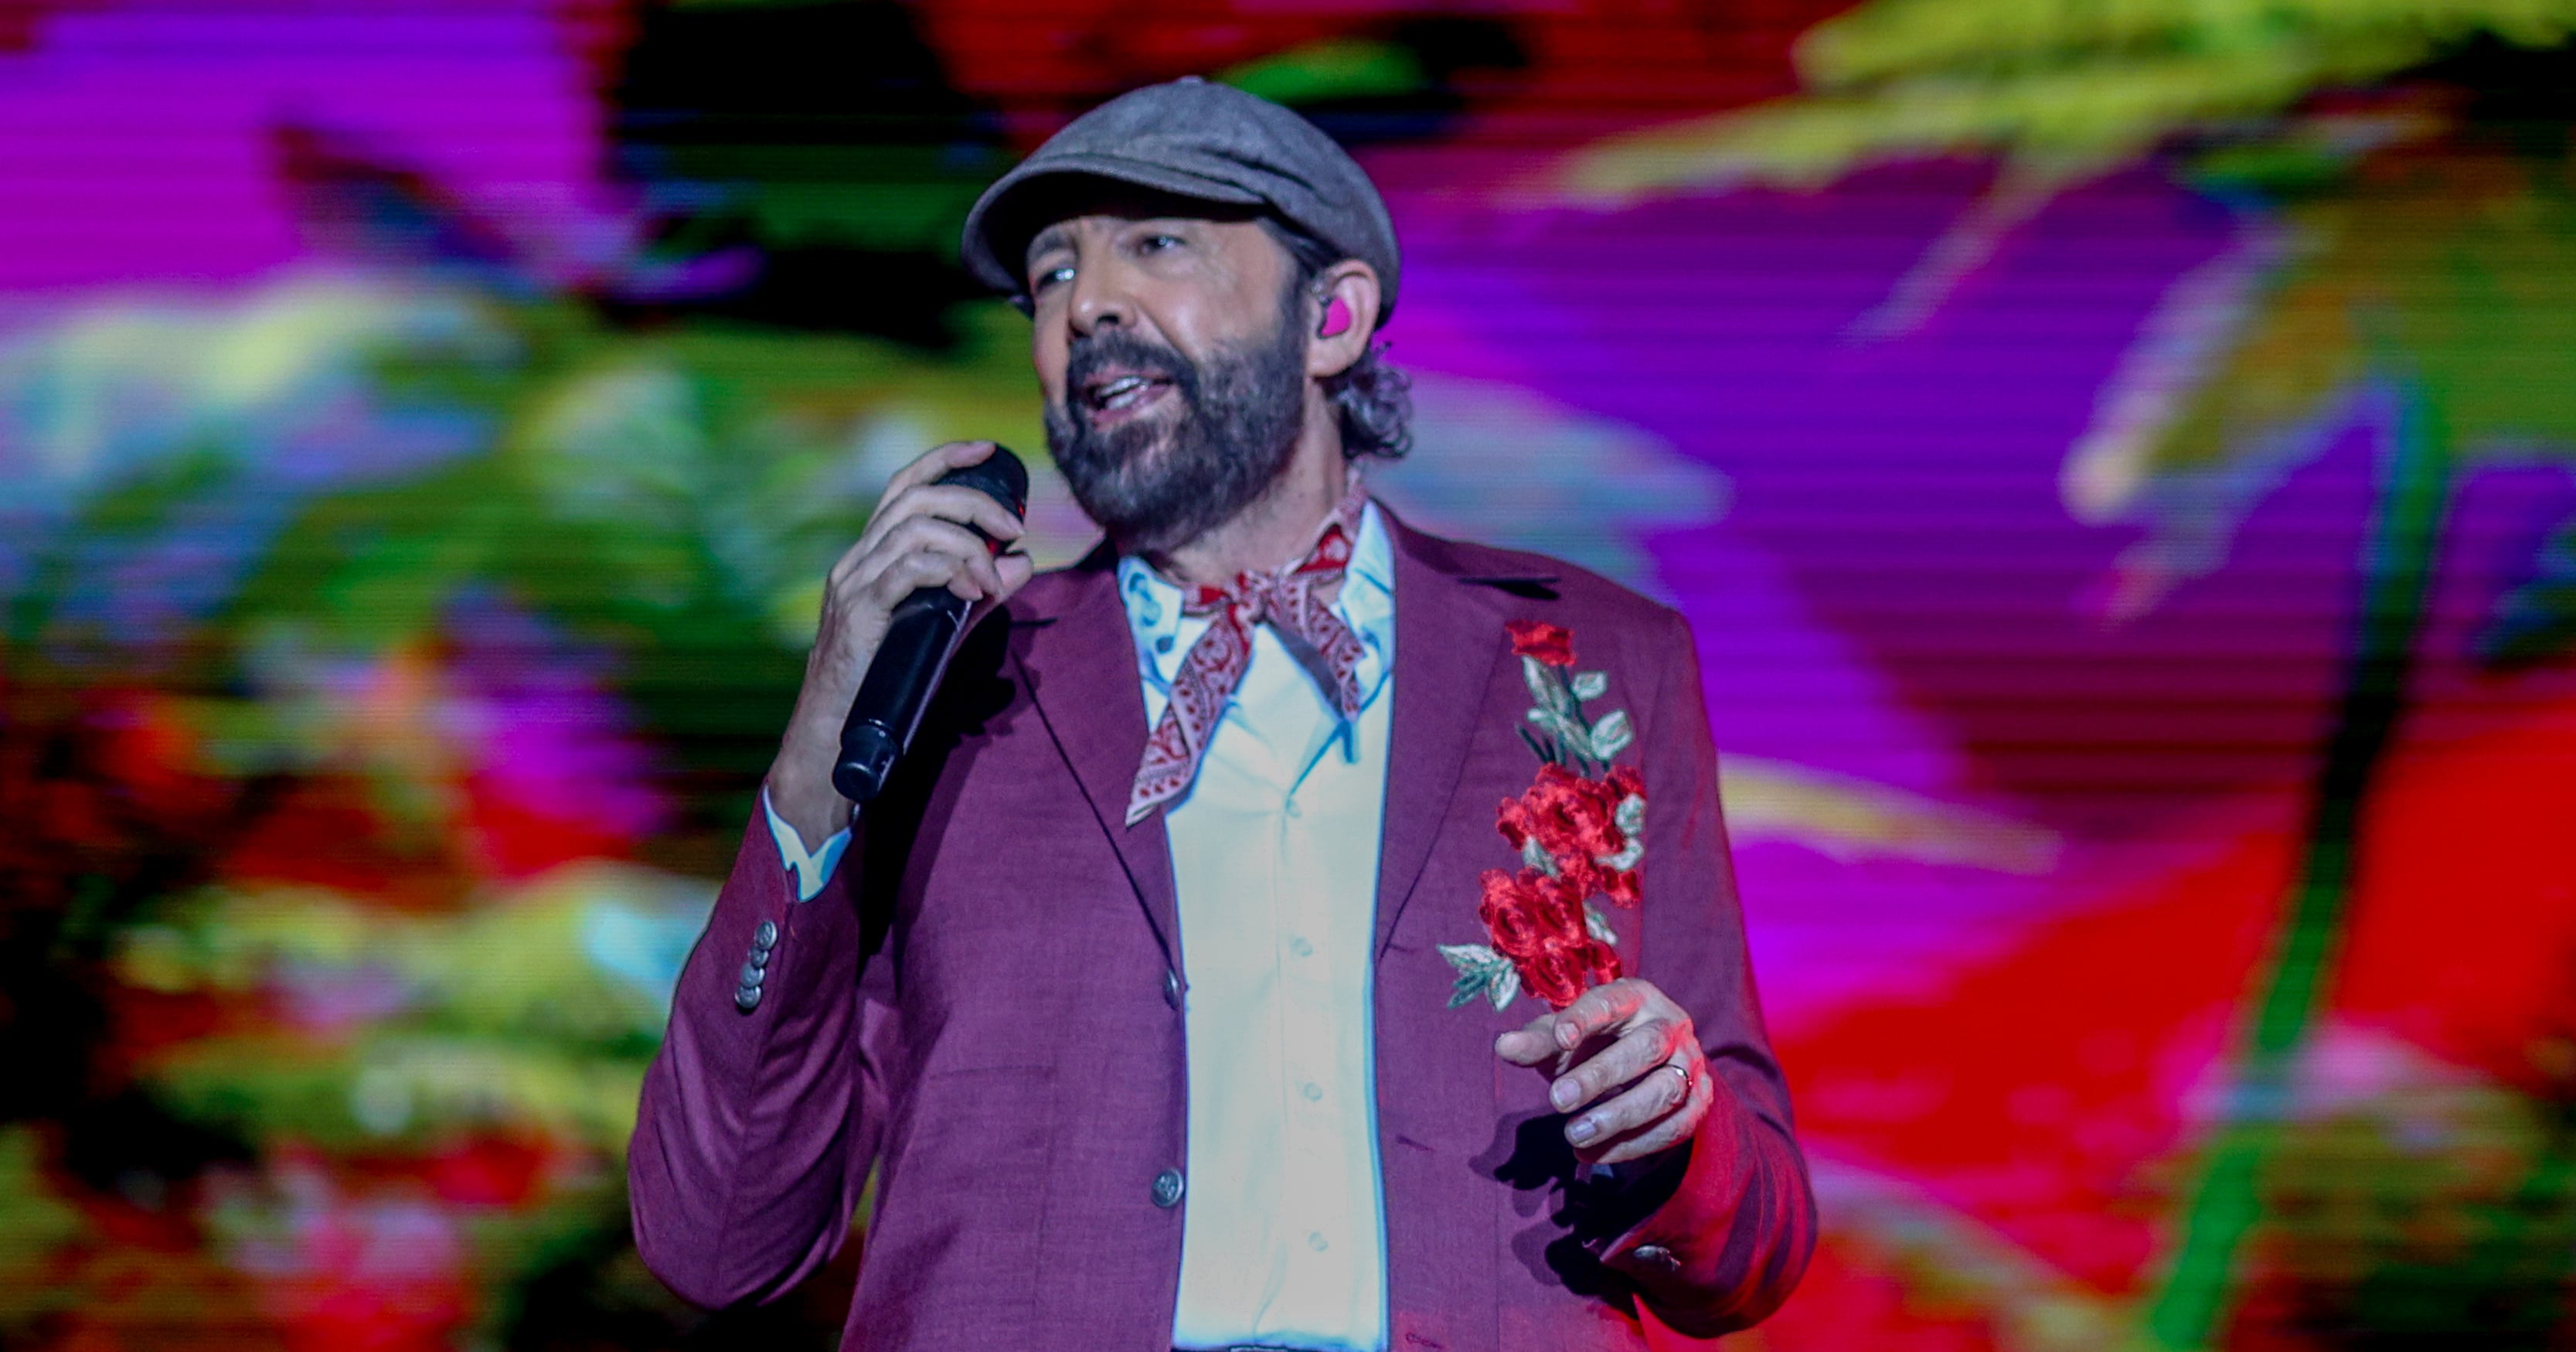 Innovating Latin Music Is What's Made Juan Luis Guerra a Legend - His New EP "Radio Güira" Is Proof